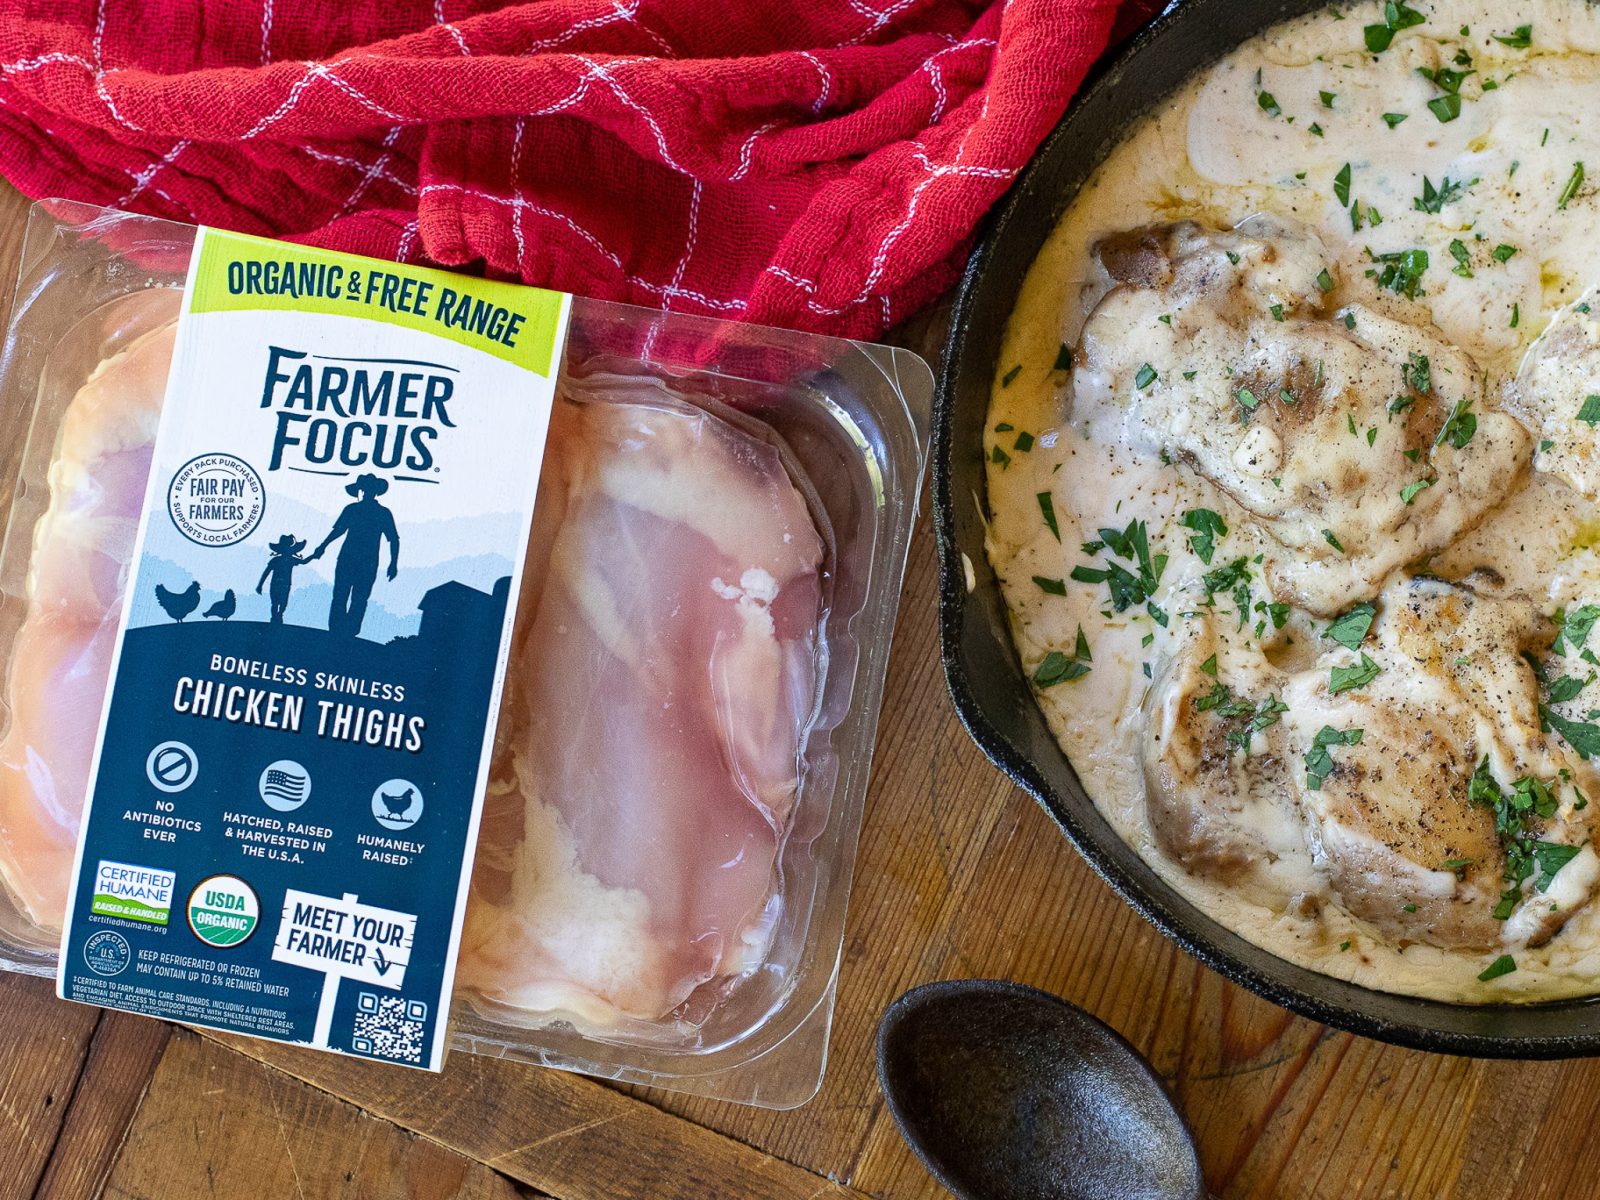 Stock Up On Farmer Focus Chicken Thighs – Buy One Pack Get One FREE At Publix!